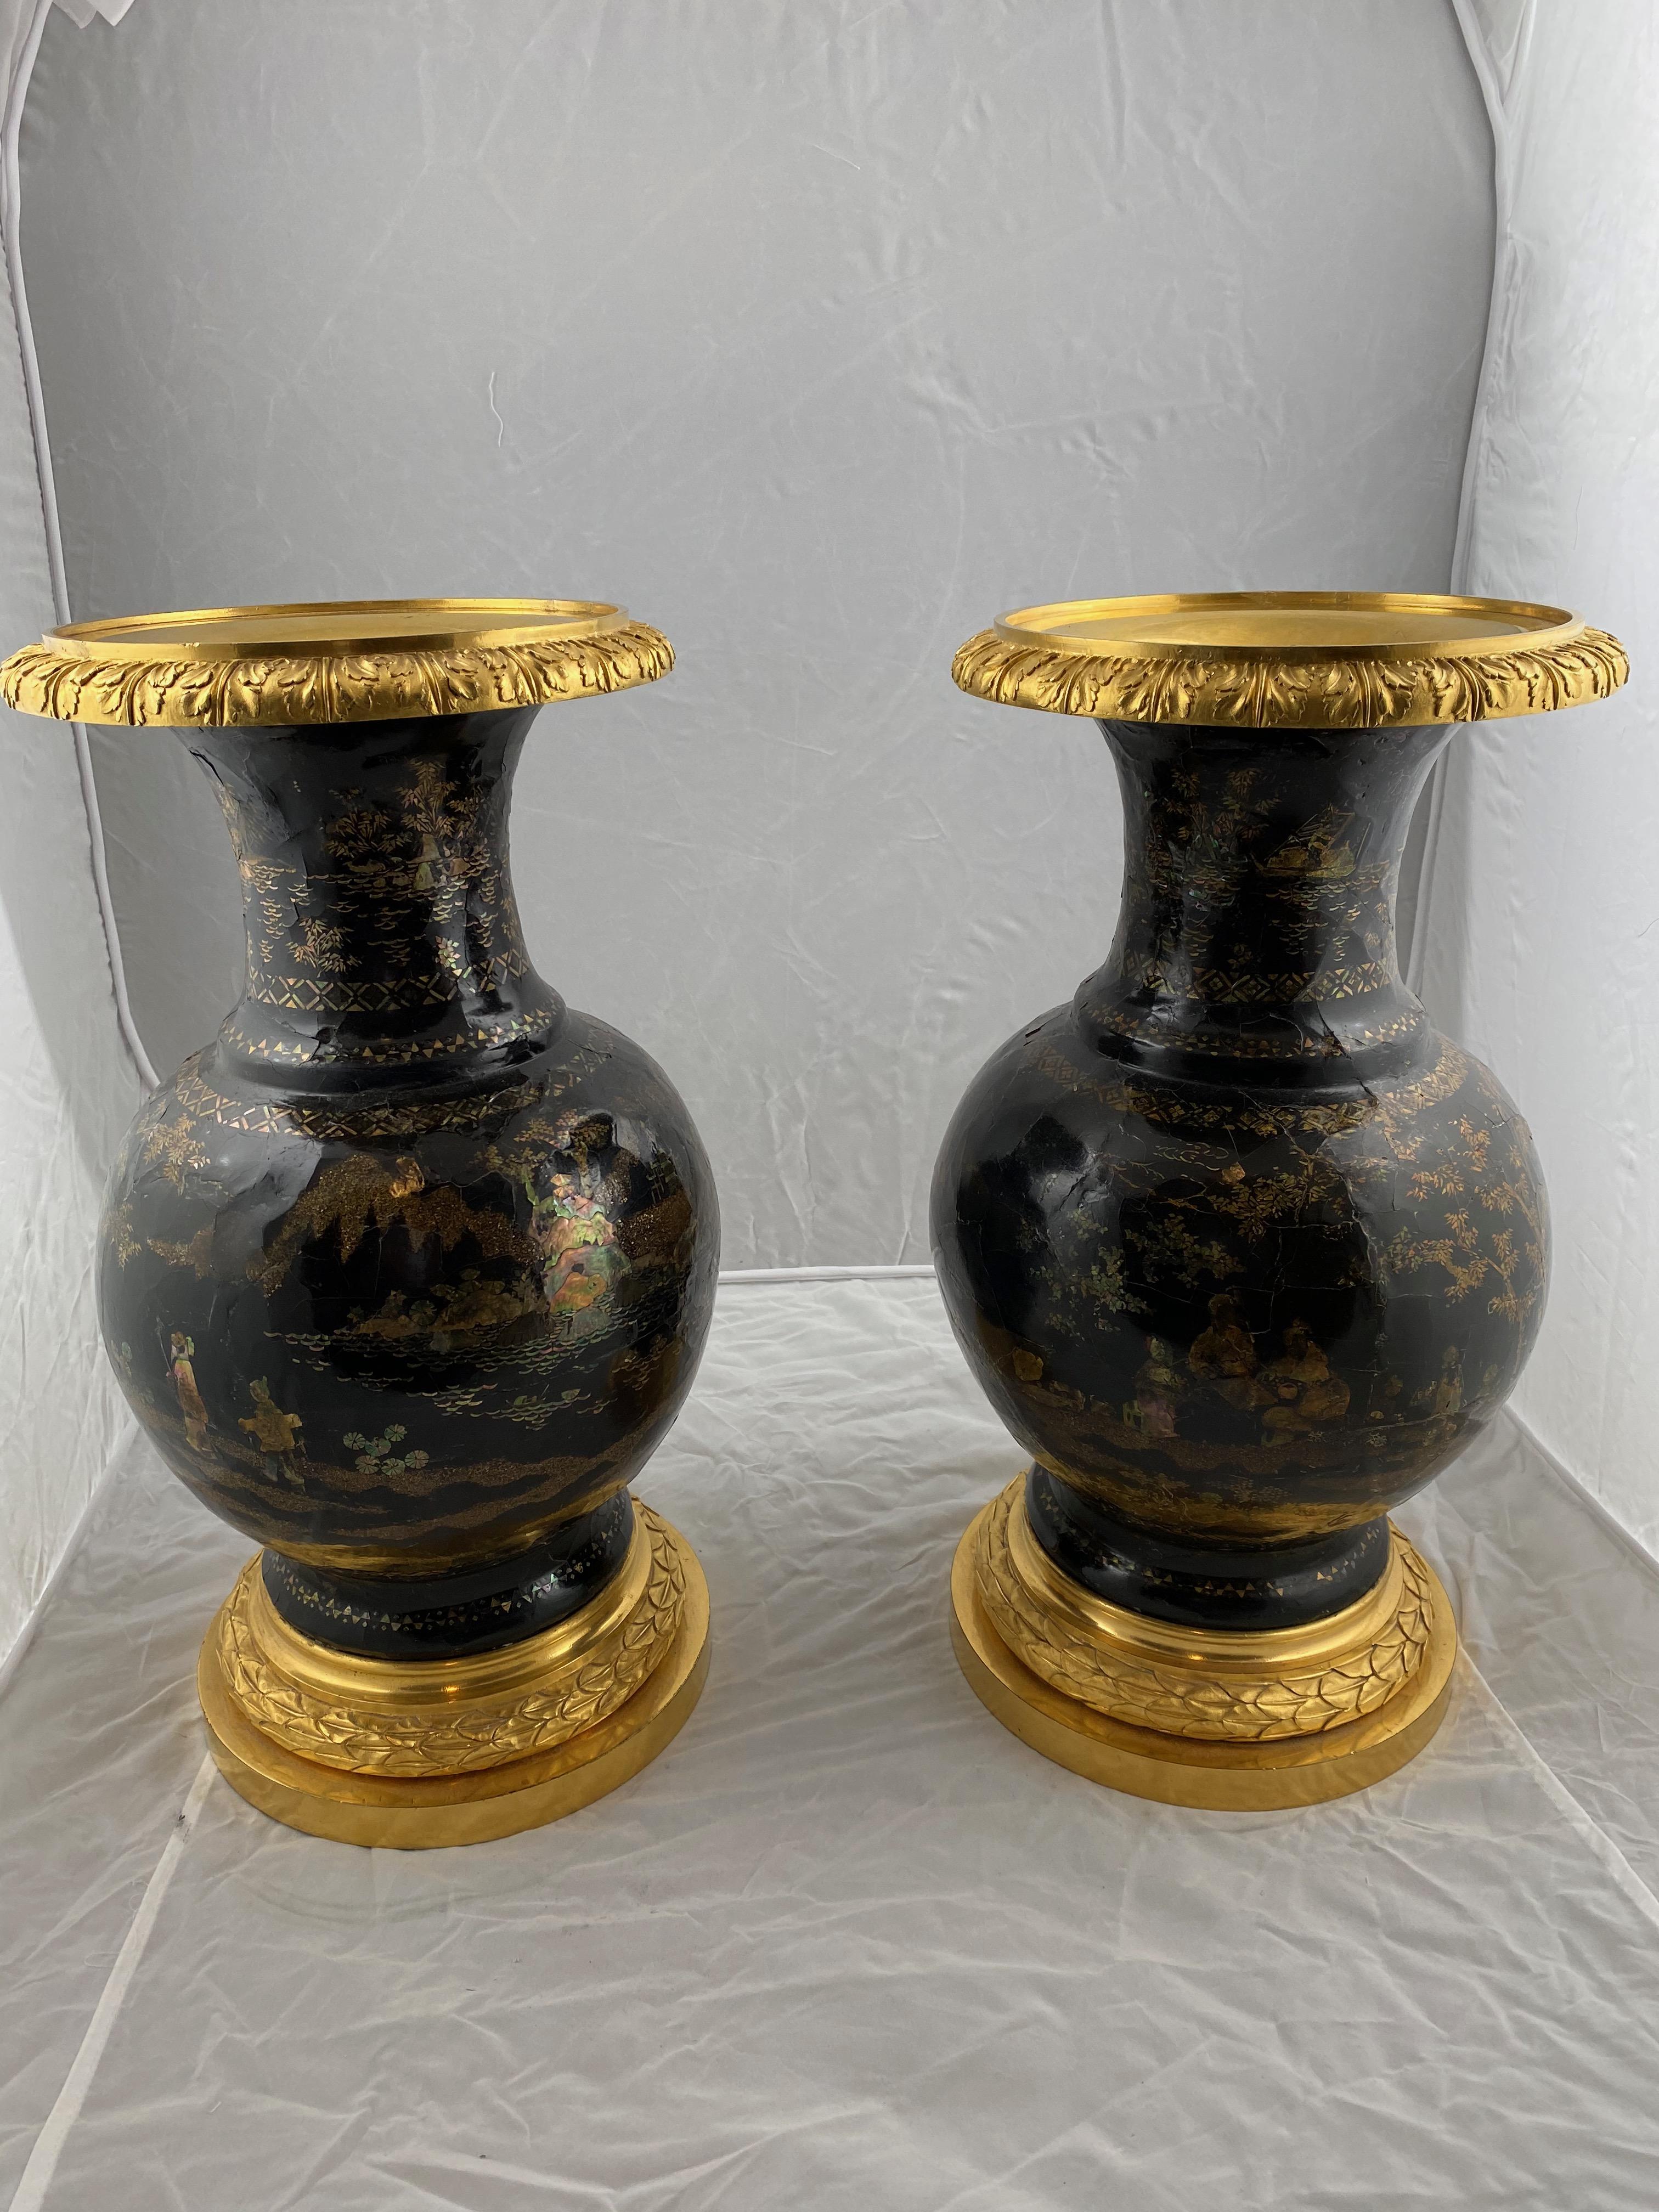 European Pair of Chinese Lacquer Urns Mounted with Gilt Bronzes, 19th Century